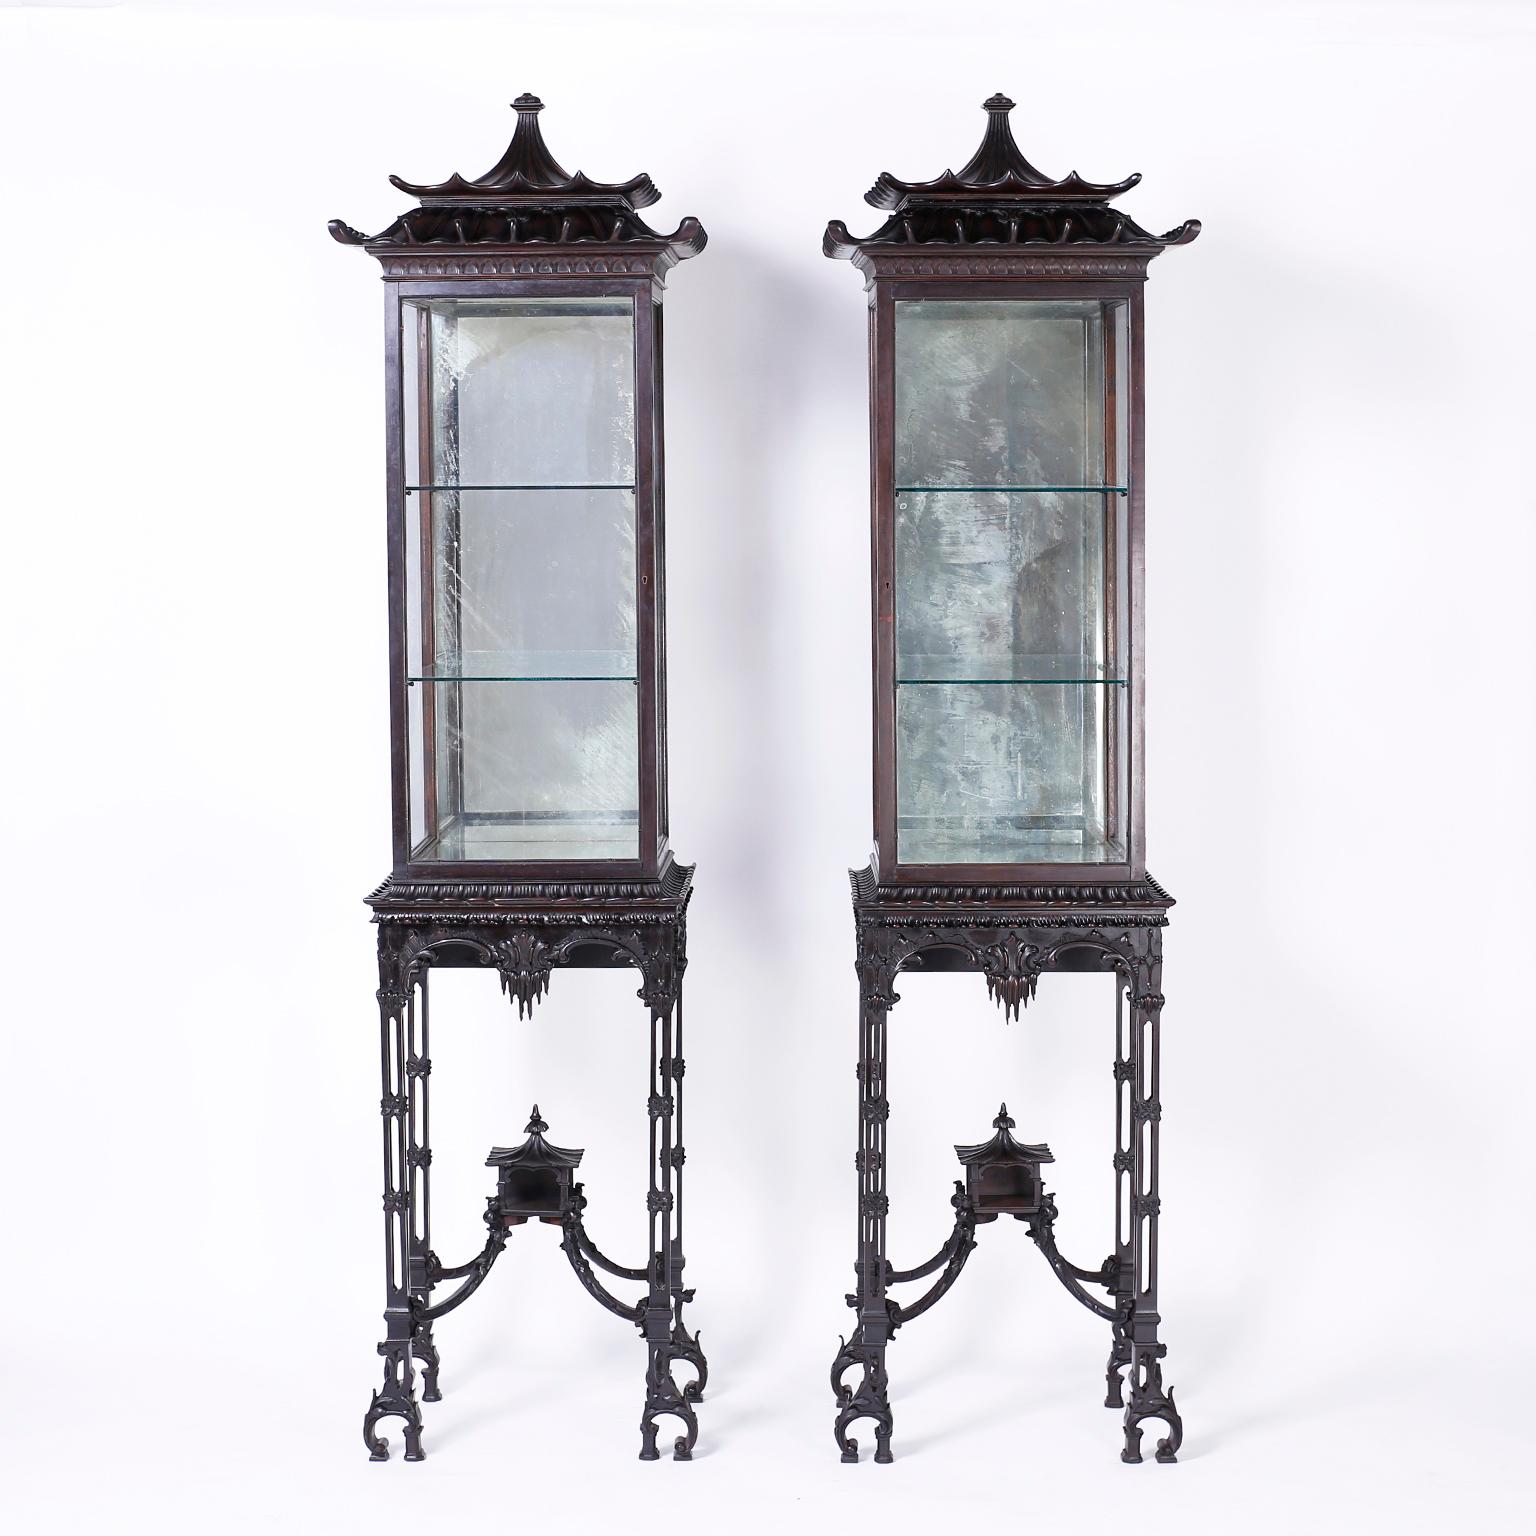 Pair of antique mahogany display cases that are a stunning example of the Chinese Chippendale style. Having pagoda tops over a glass case with glass shelves and a mirrored background. The elaborate carved bases have classic oriental legs supported